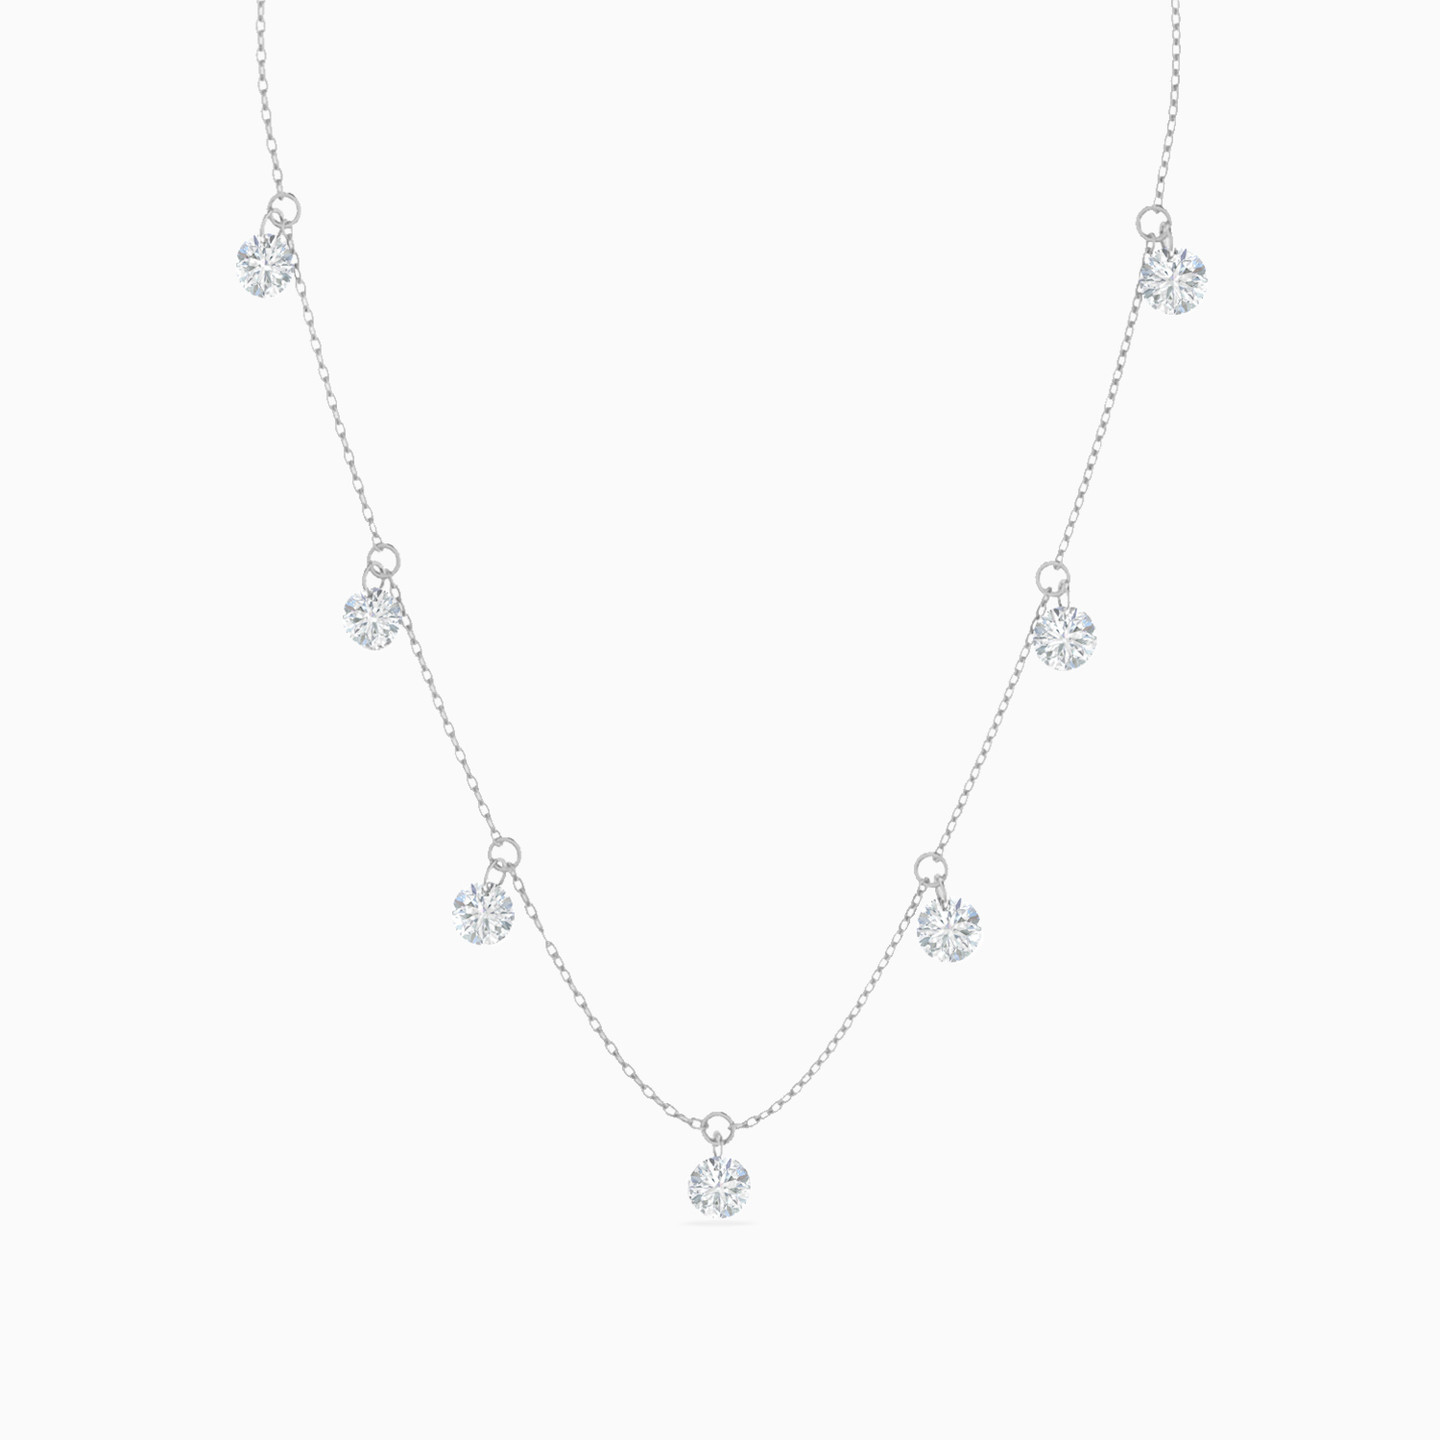 18K Gold Cubic Zirconia Chain Necklace - 3